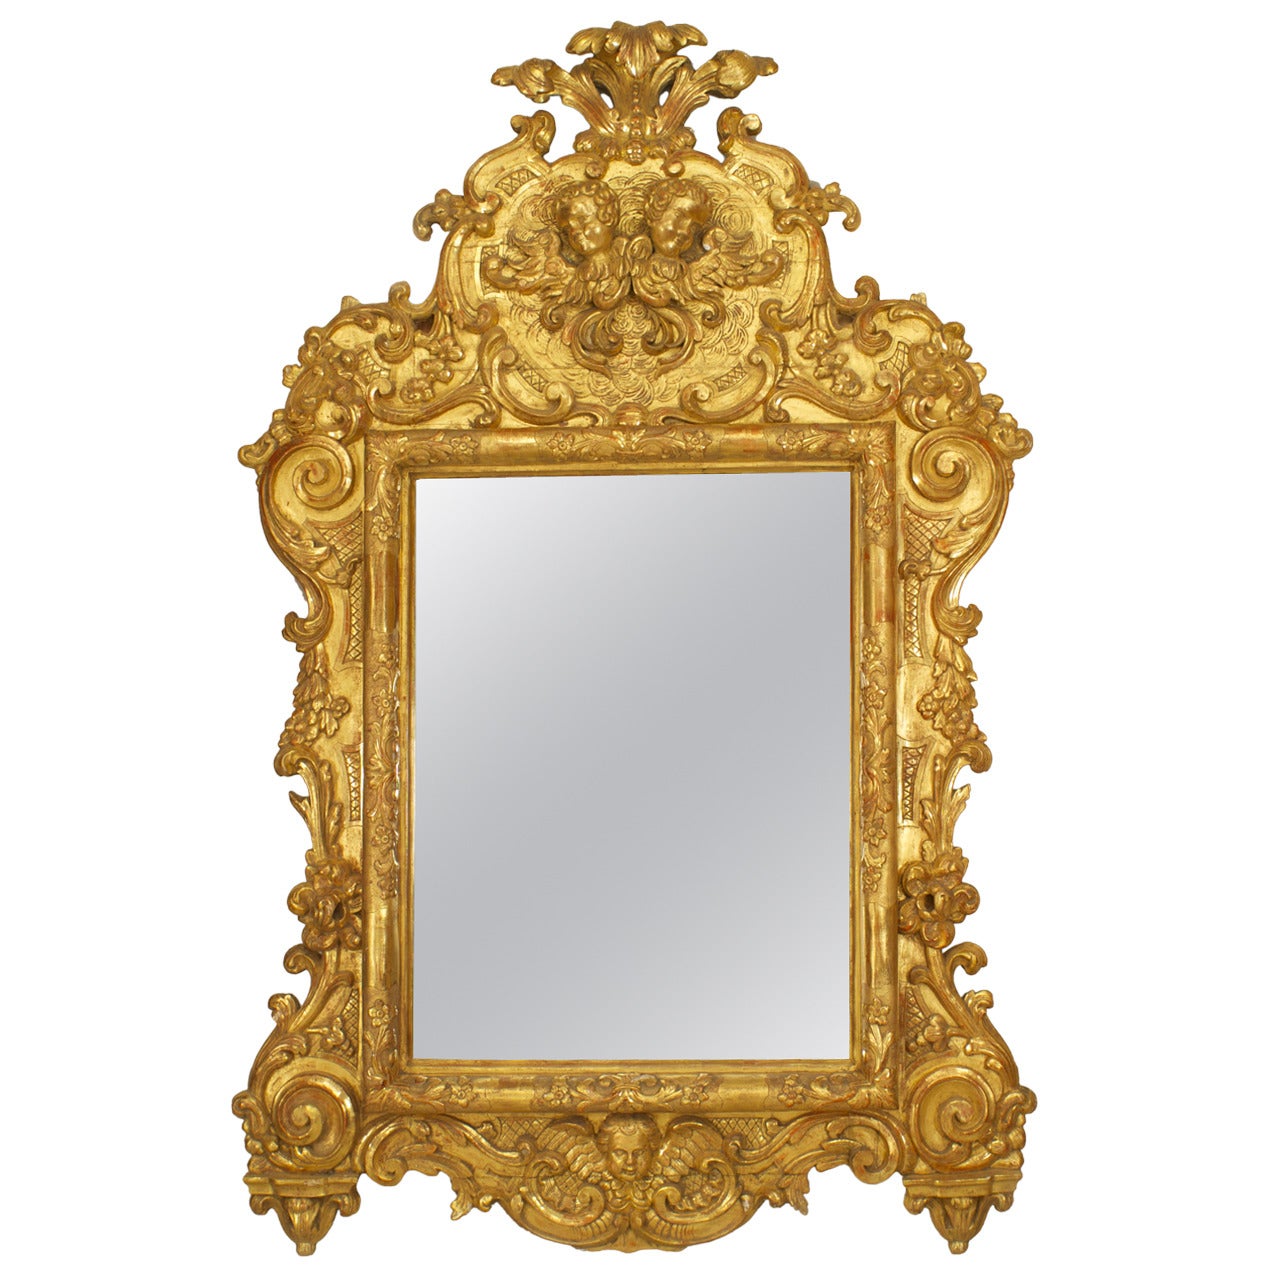 Italian Rococo Carved Giltwood Cupid and Floral Design Wall Mirror For Sale